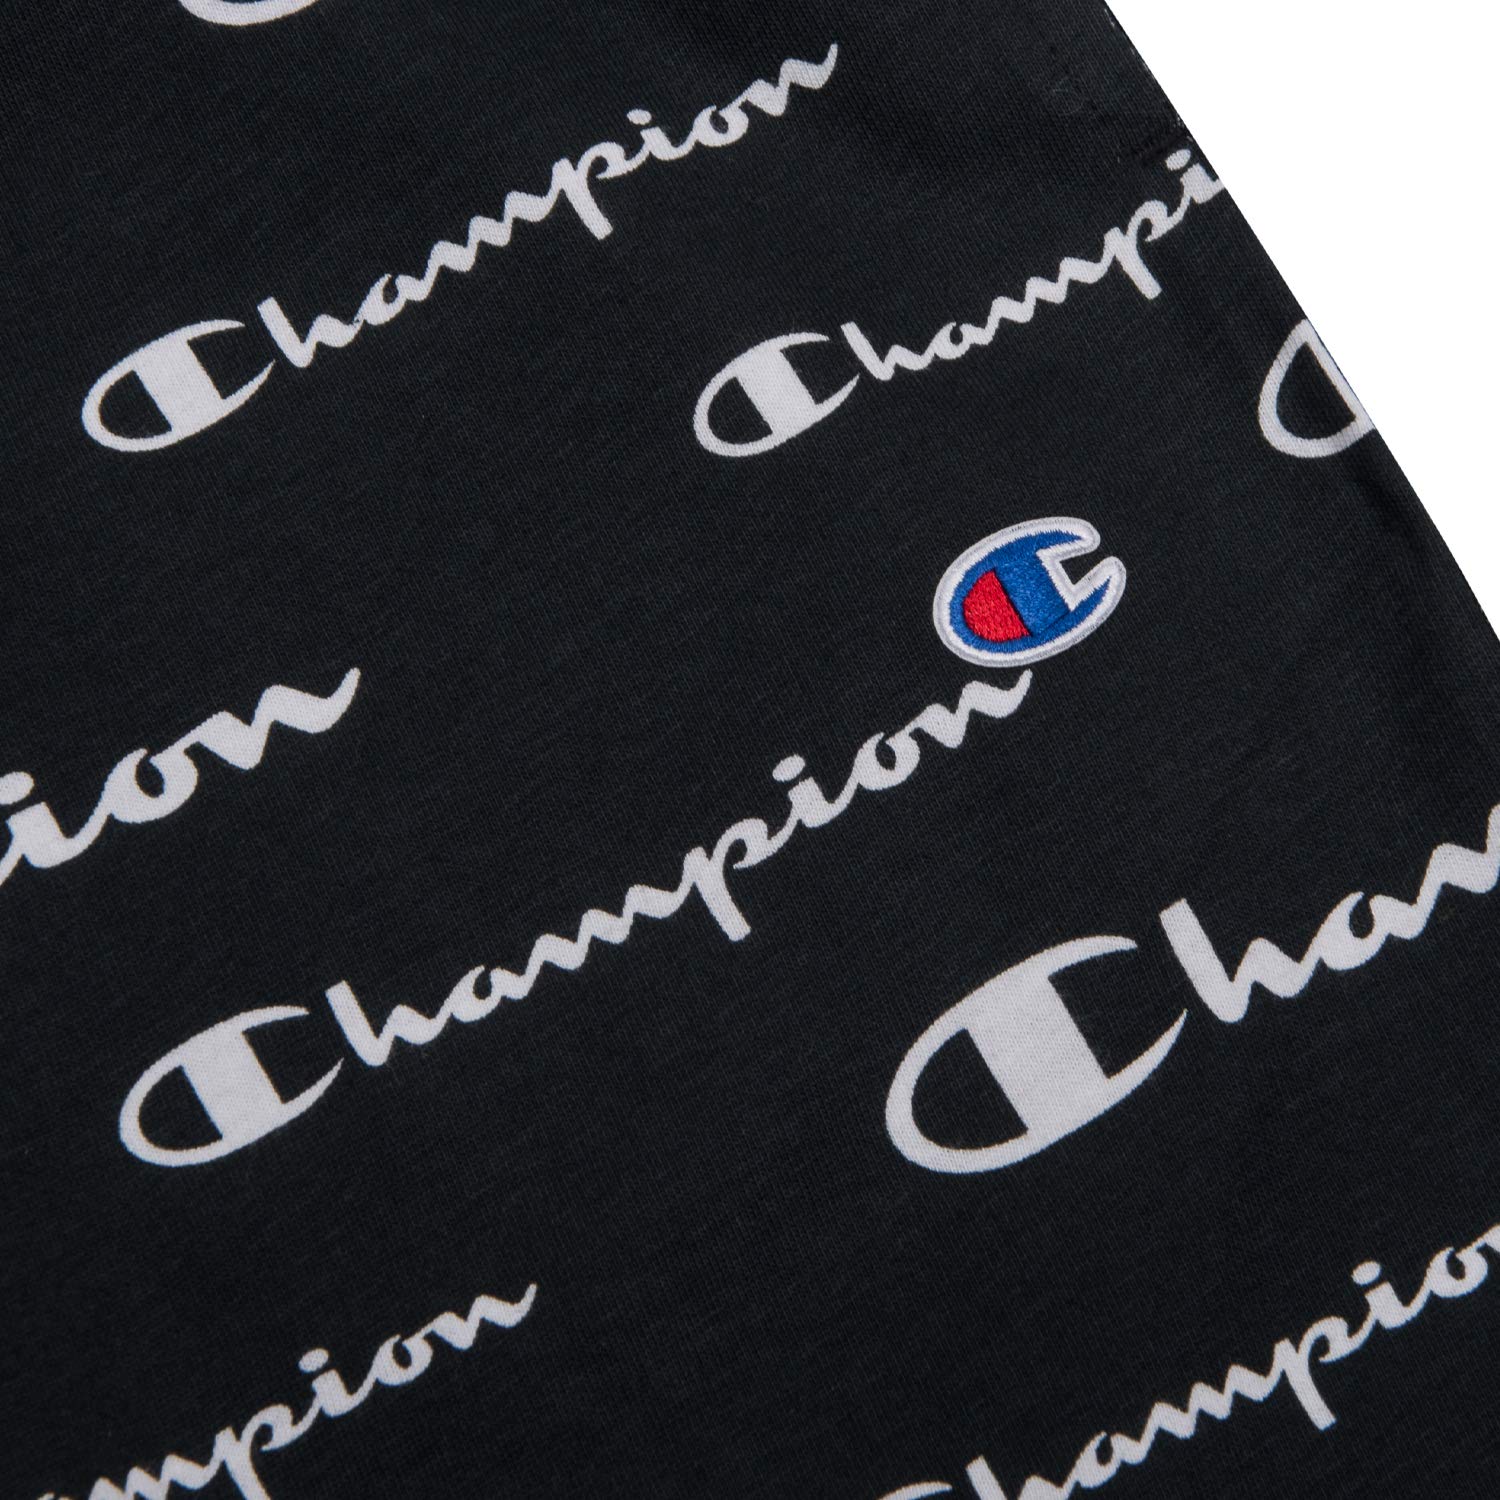 Champion Mens Shorts Big and Tall- All Over Print Mens Workout Gym Shorts Black White